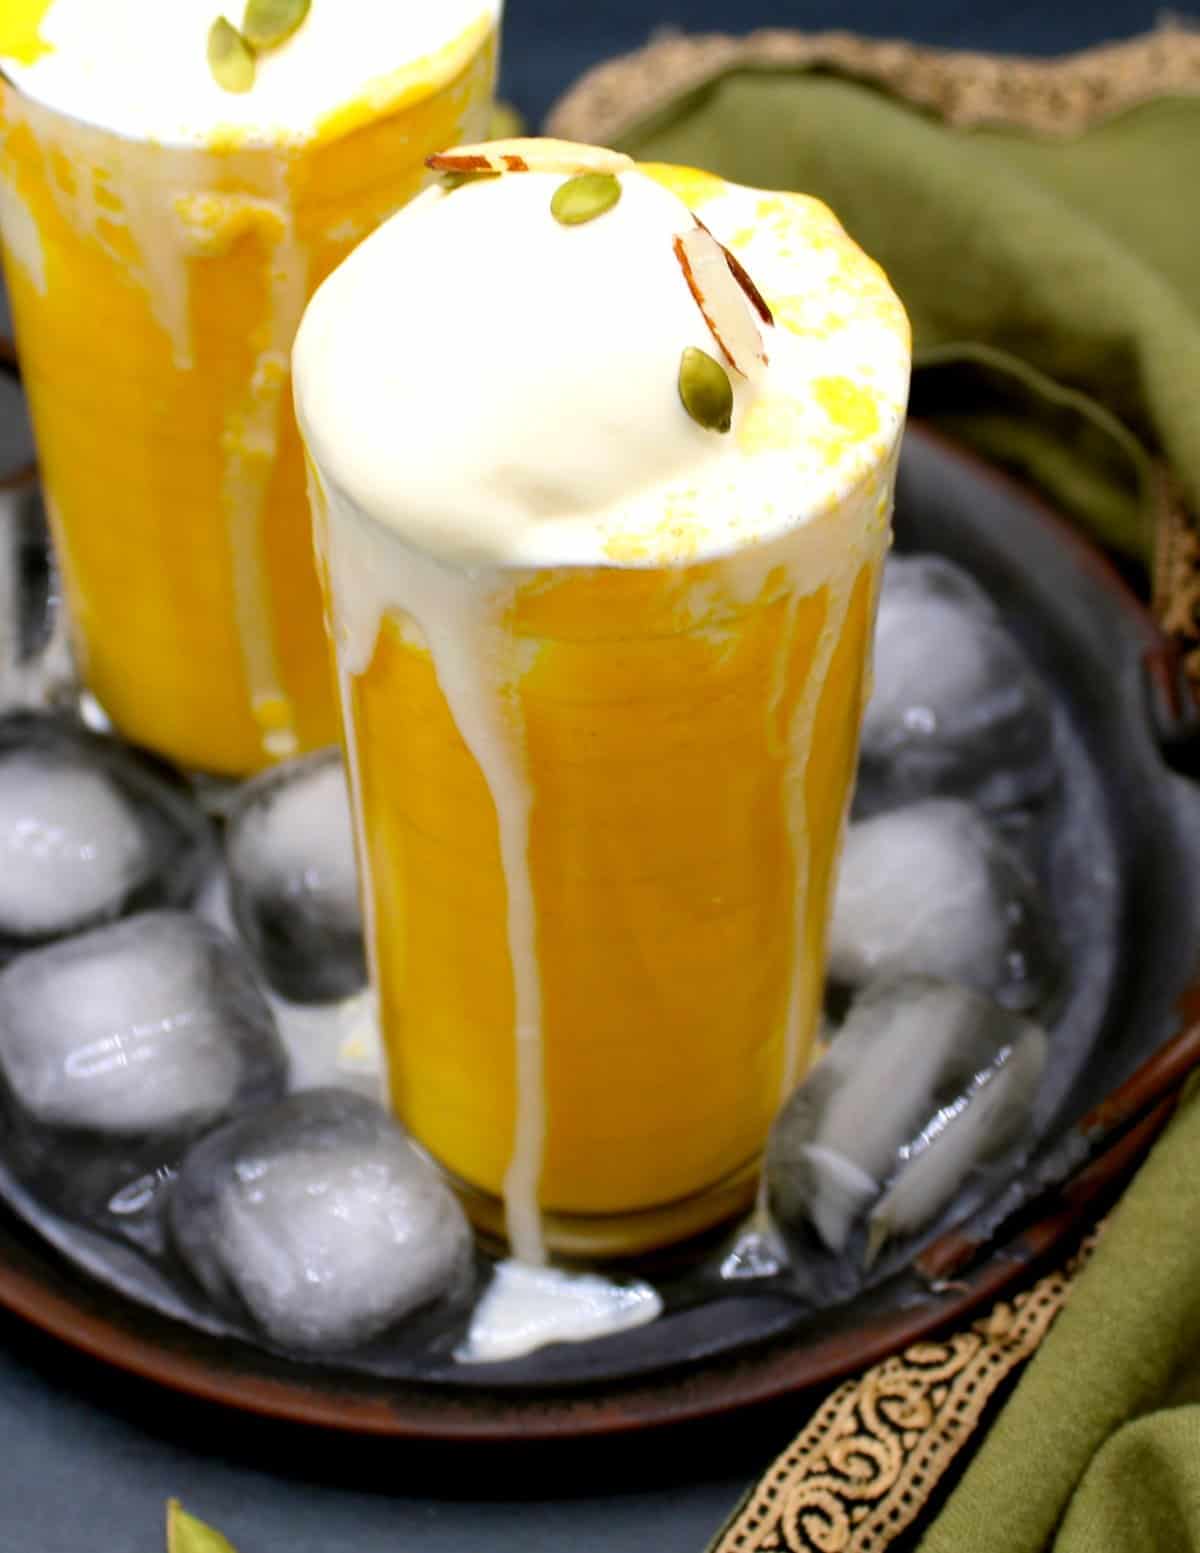 Glasses of vegan mango smoothie with ice cream in an ice-filled tray. A green napkin is around it.